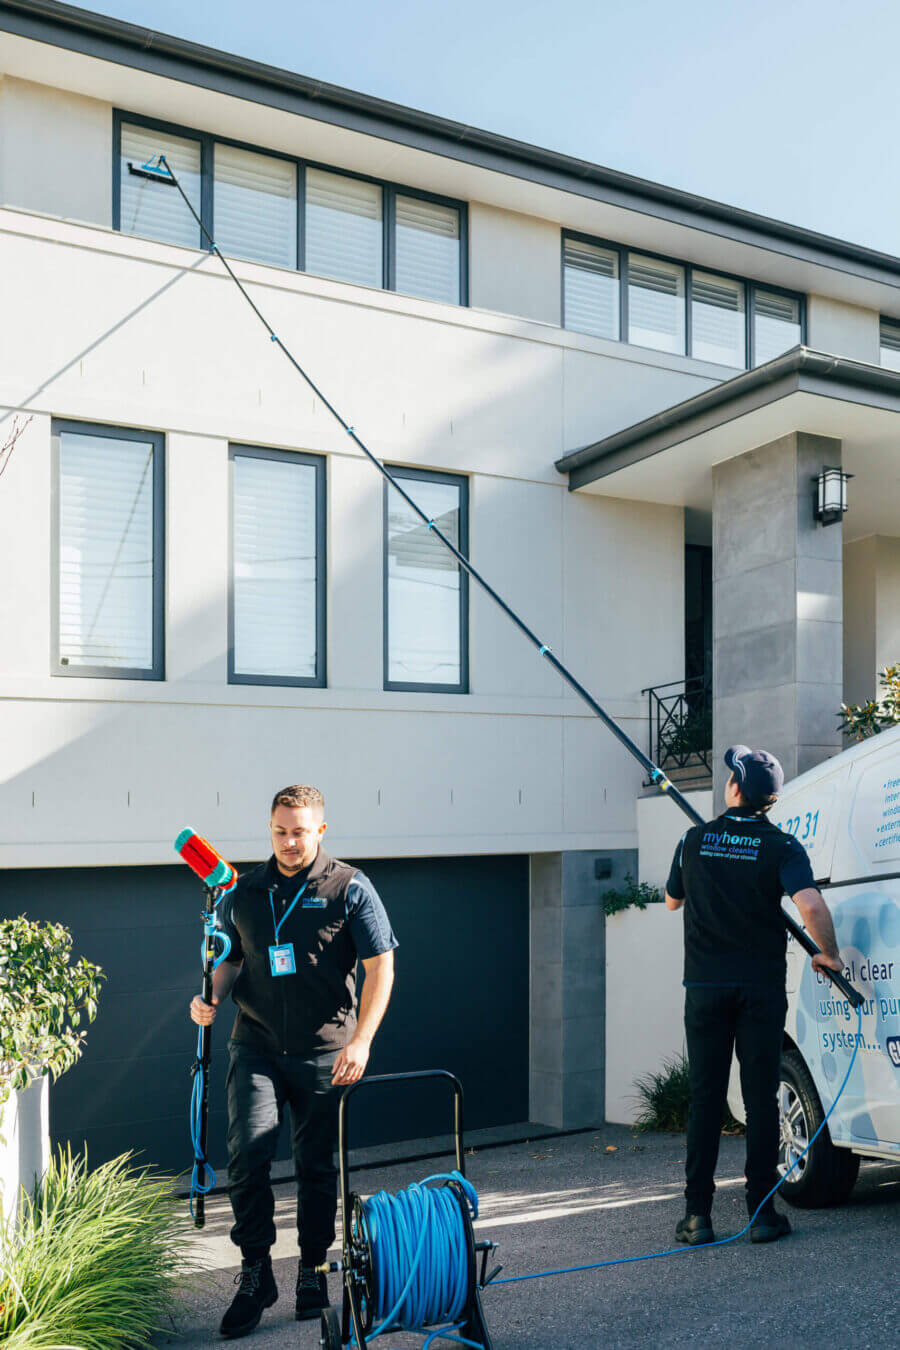 A MyHome window cleaning team cleaning external windows of a house with the UltraPure window cleaning system